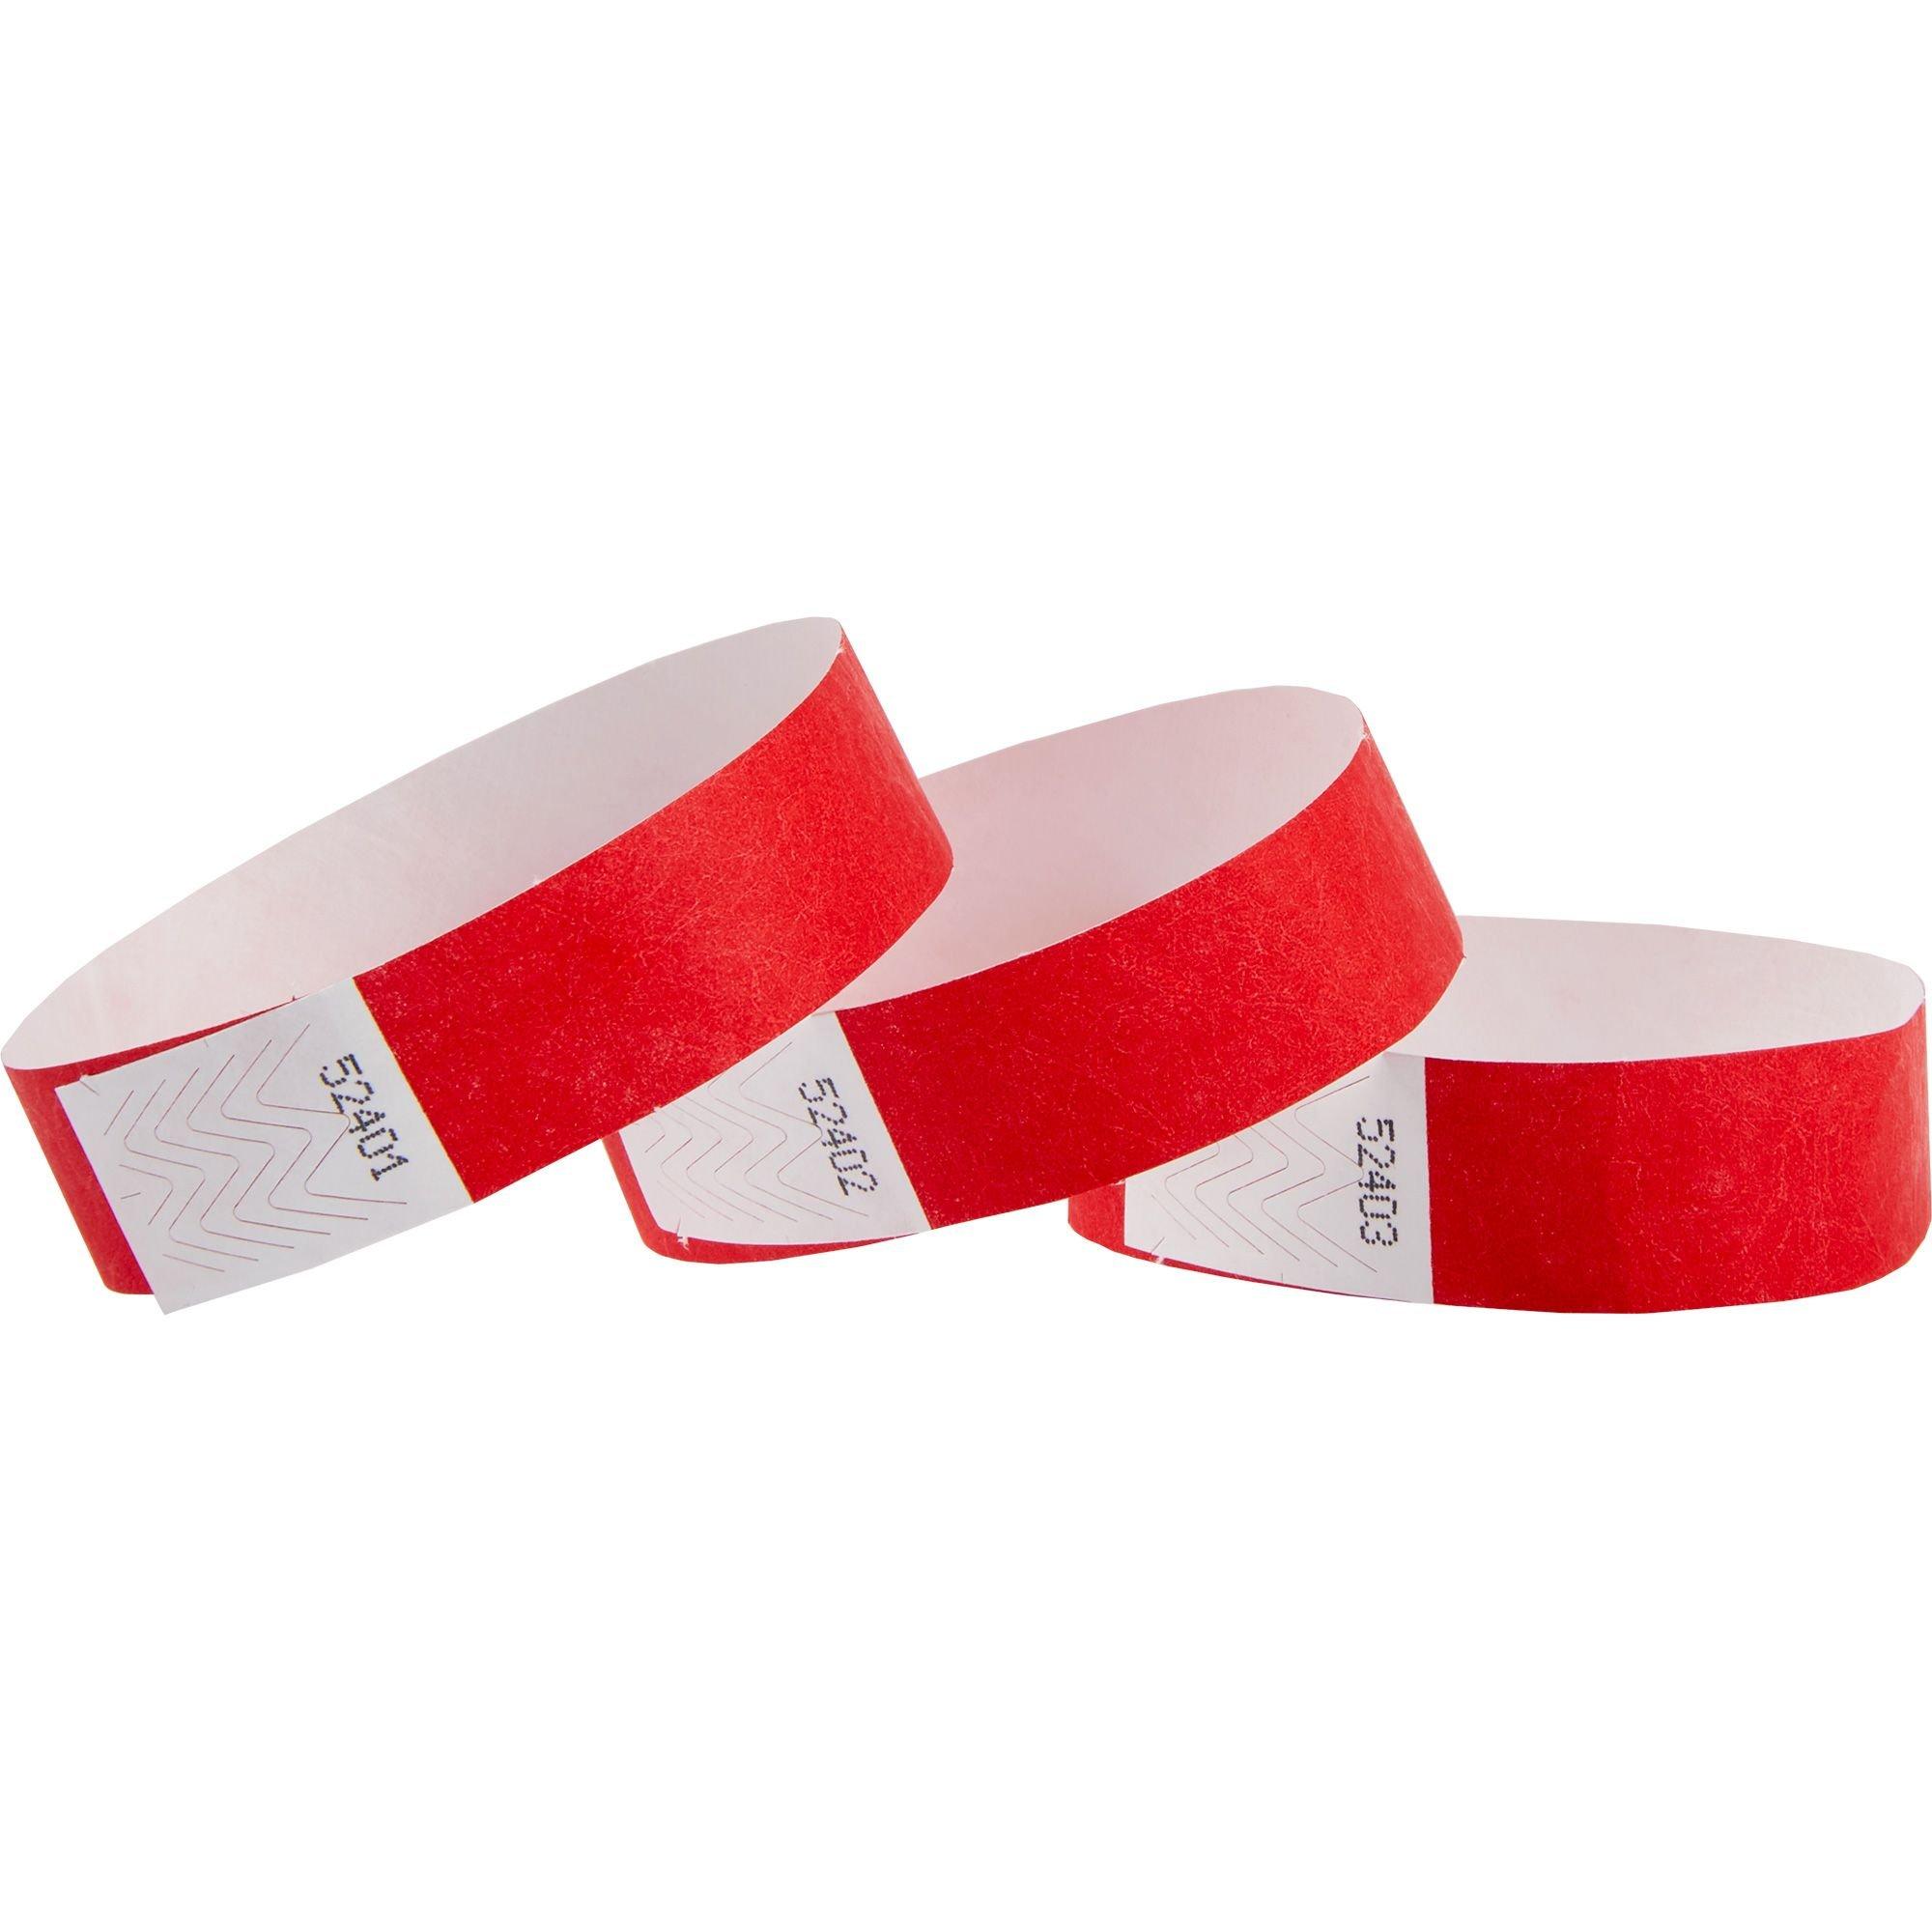 Wristbands 250ct